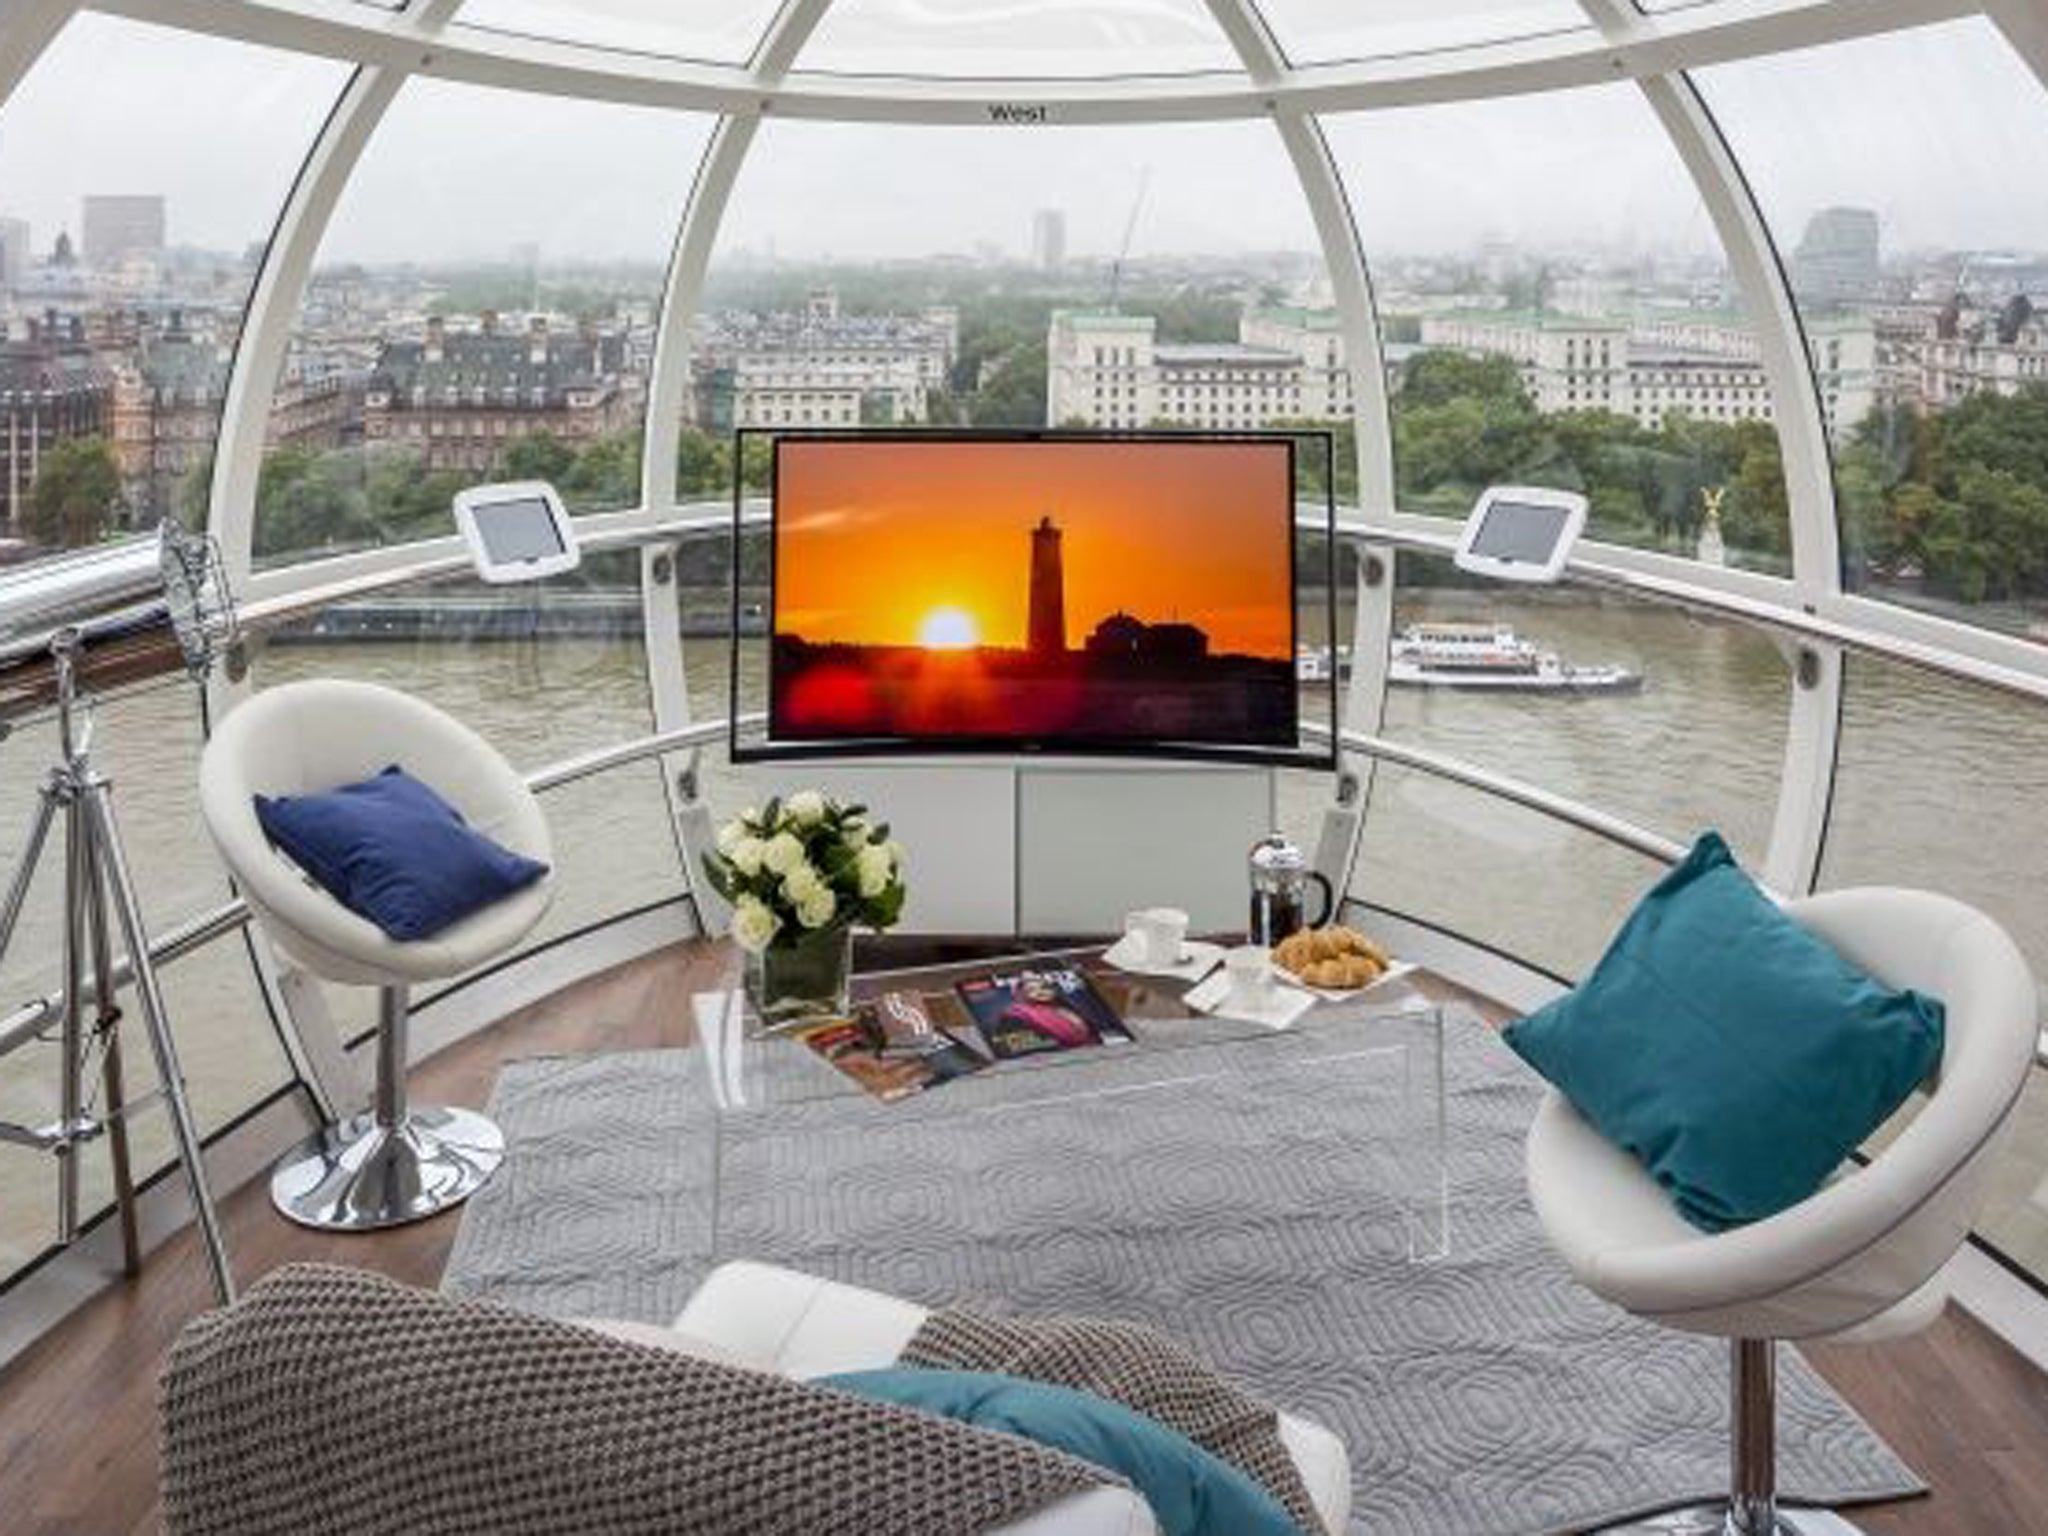 The Samsung S9C was launched on the London Eye today